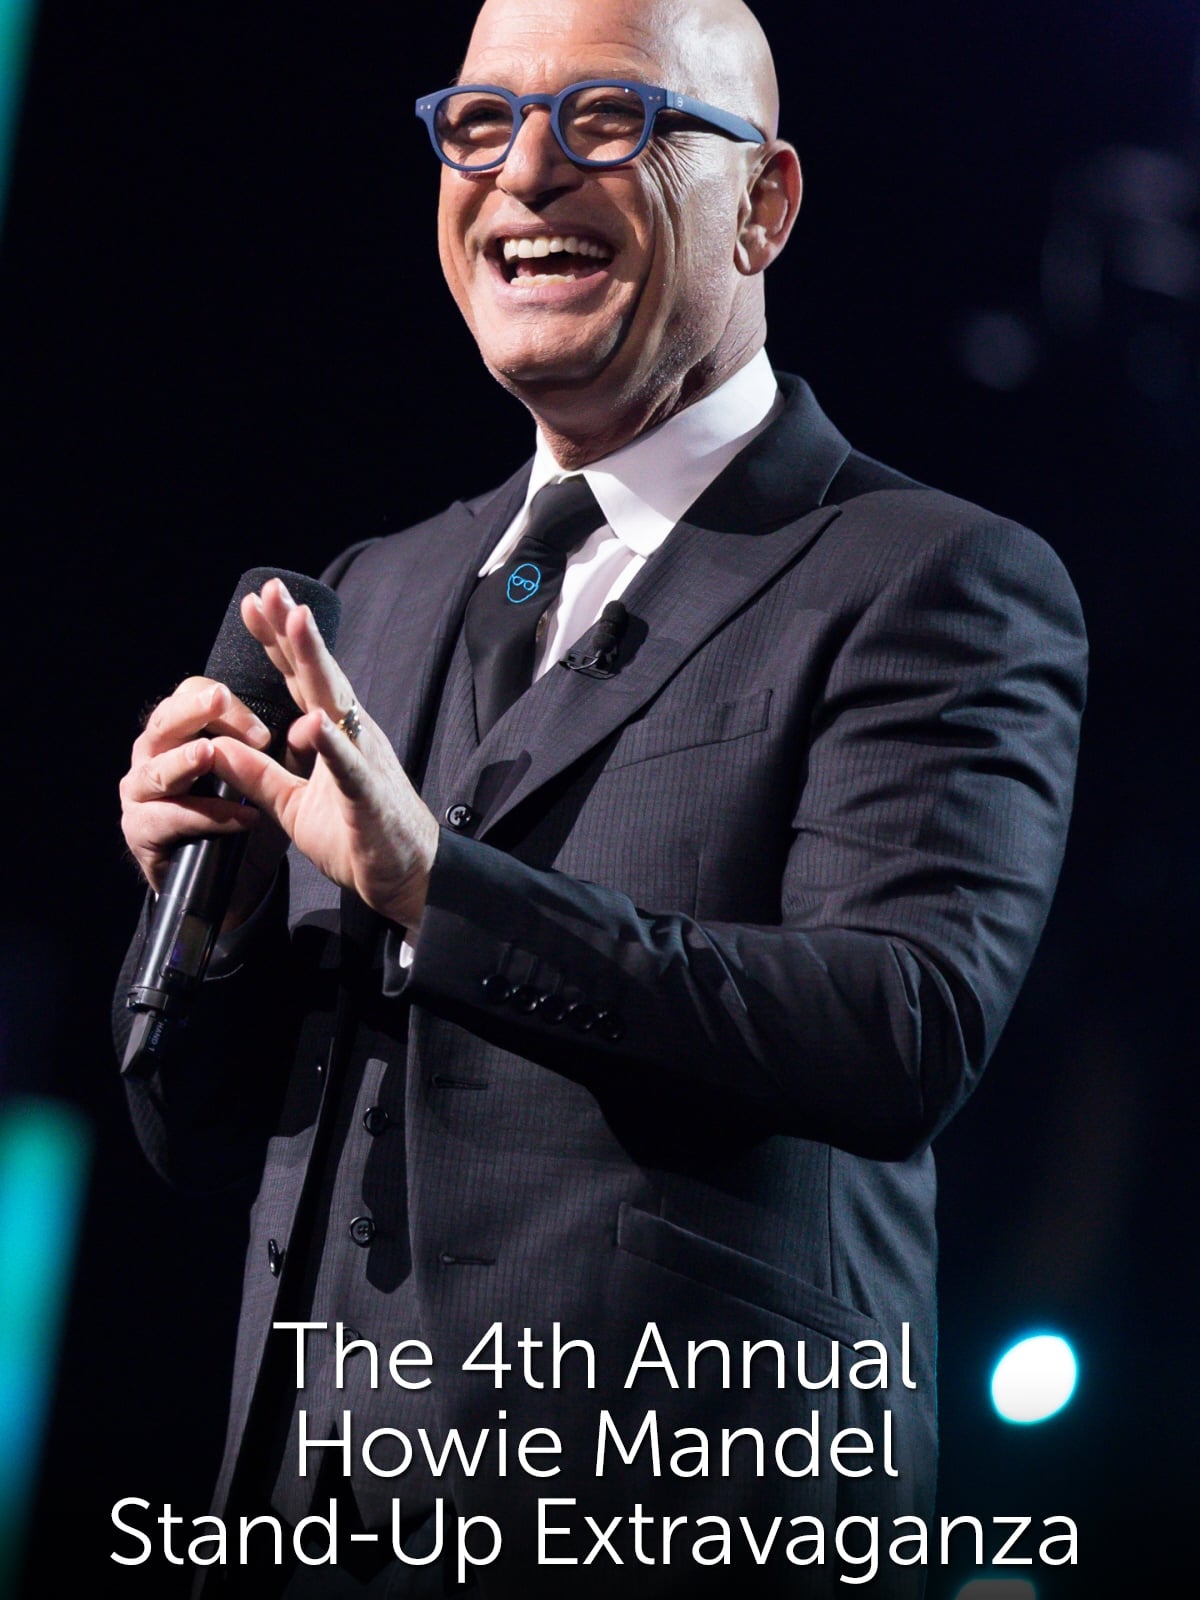 The 4th Annual Howie Mandel Stand-Up Extravaganza